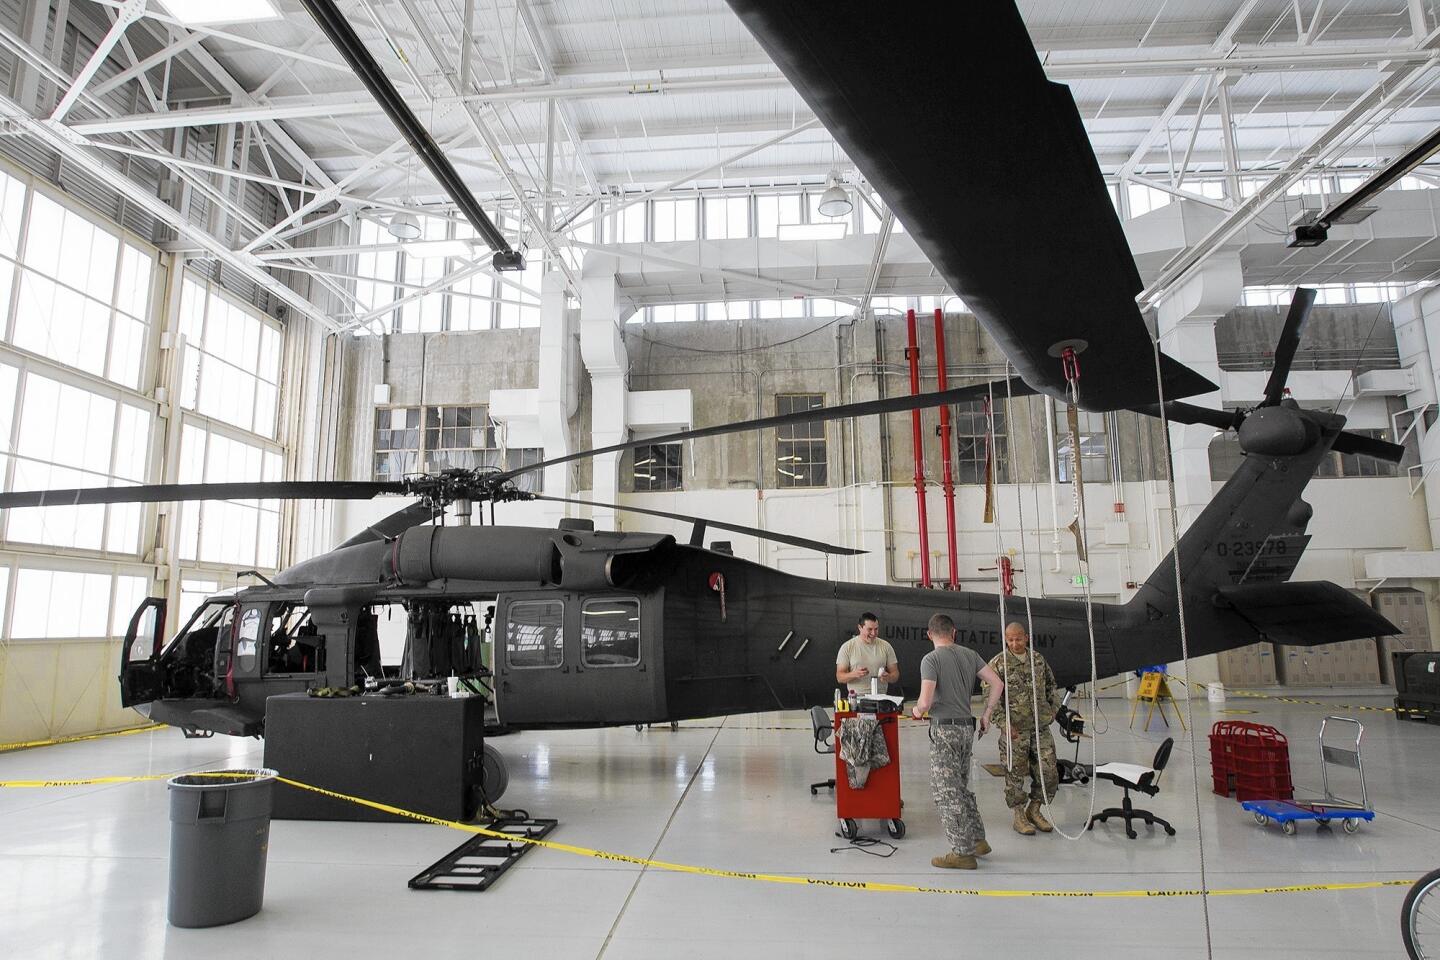 Sgt. Daniel Davis, left, Specialist Mark Enriquez, and Sgt. Sink Nuom, right, work on a UH-60 Black Hawk at the Los Alamitos Joint Forces Training Base on Monday.